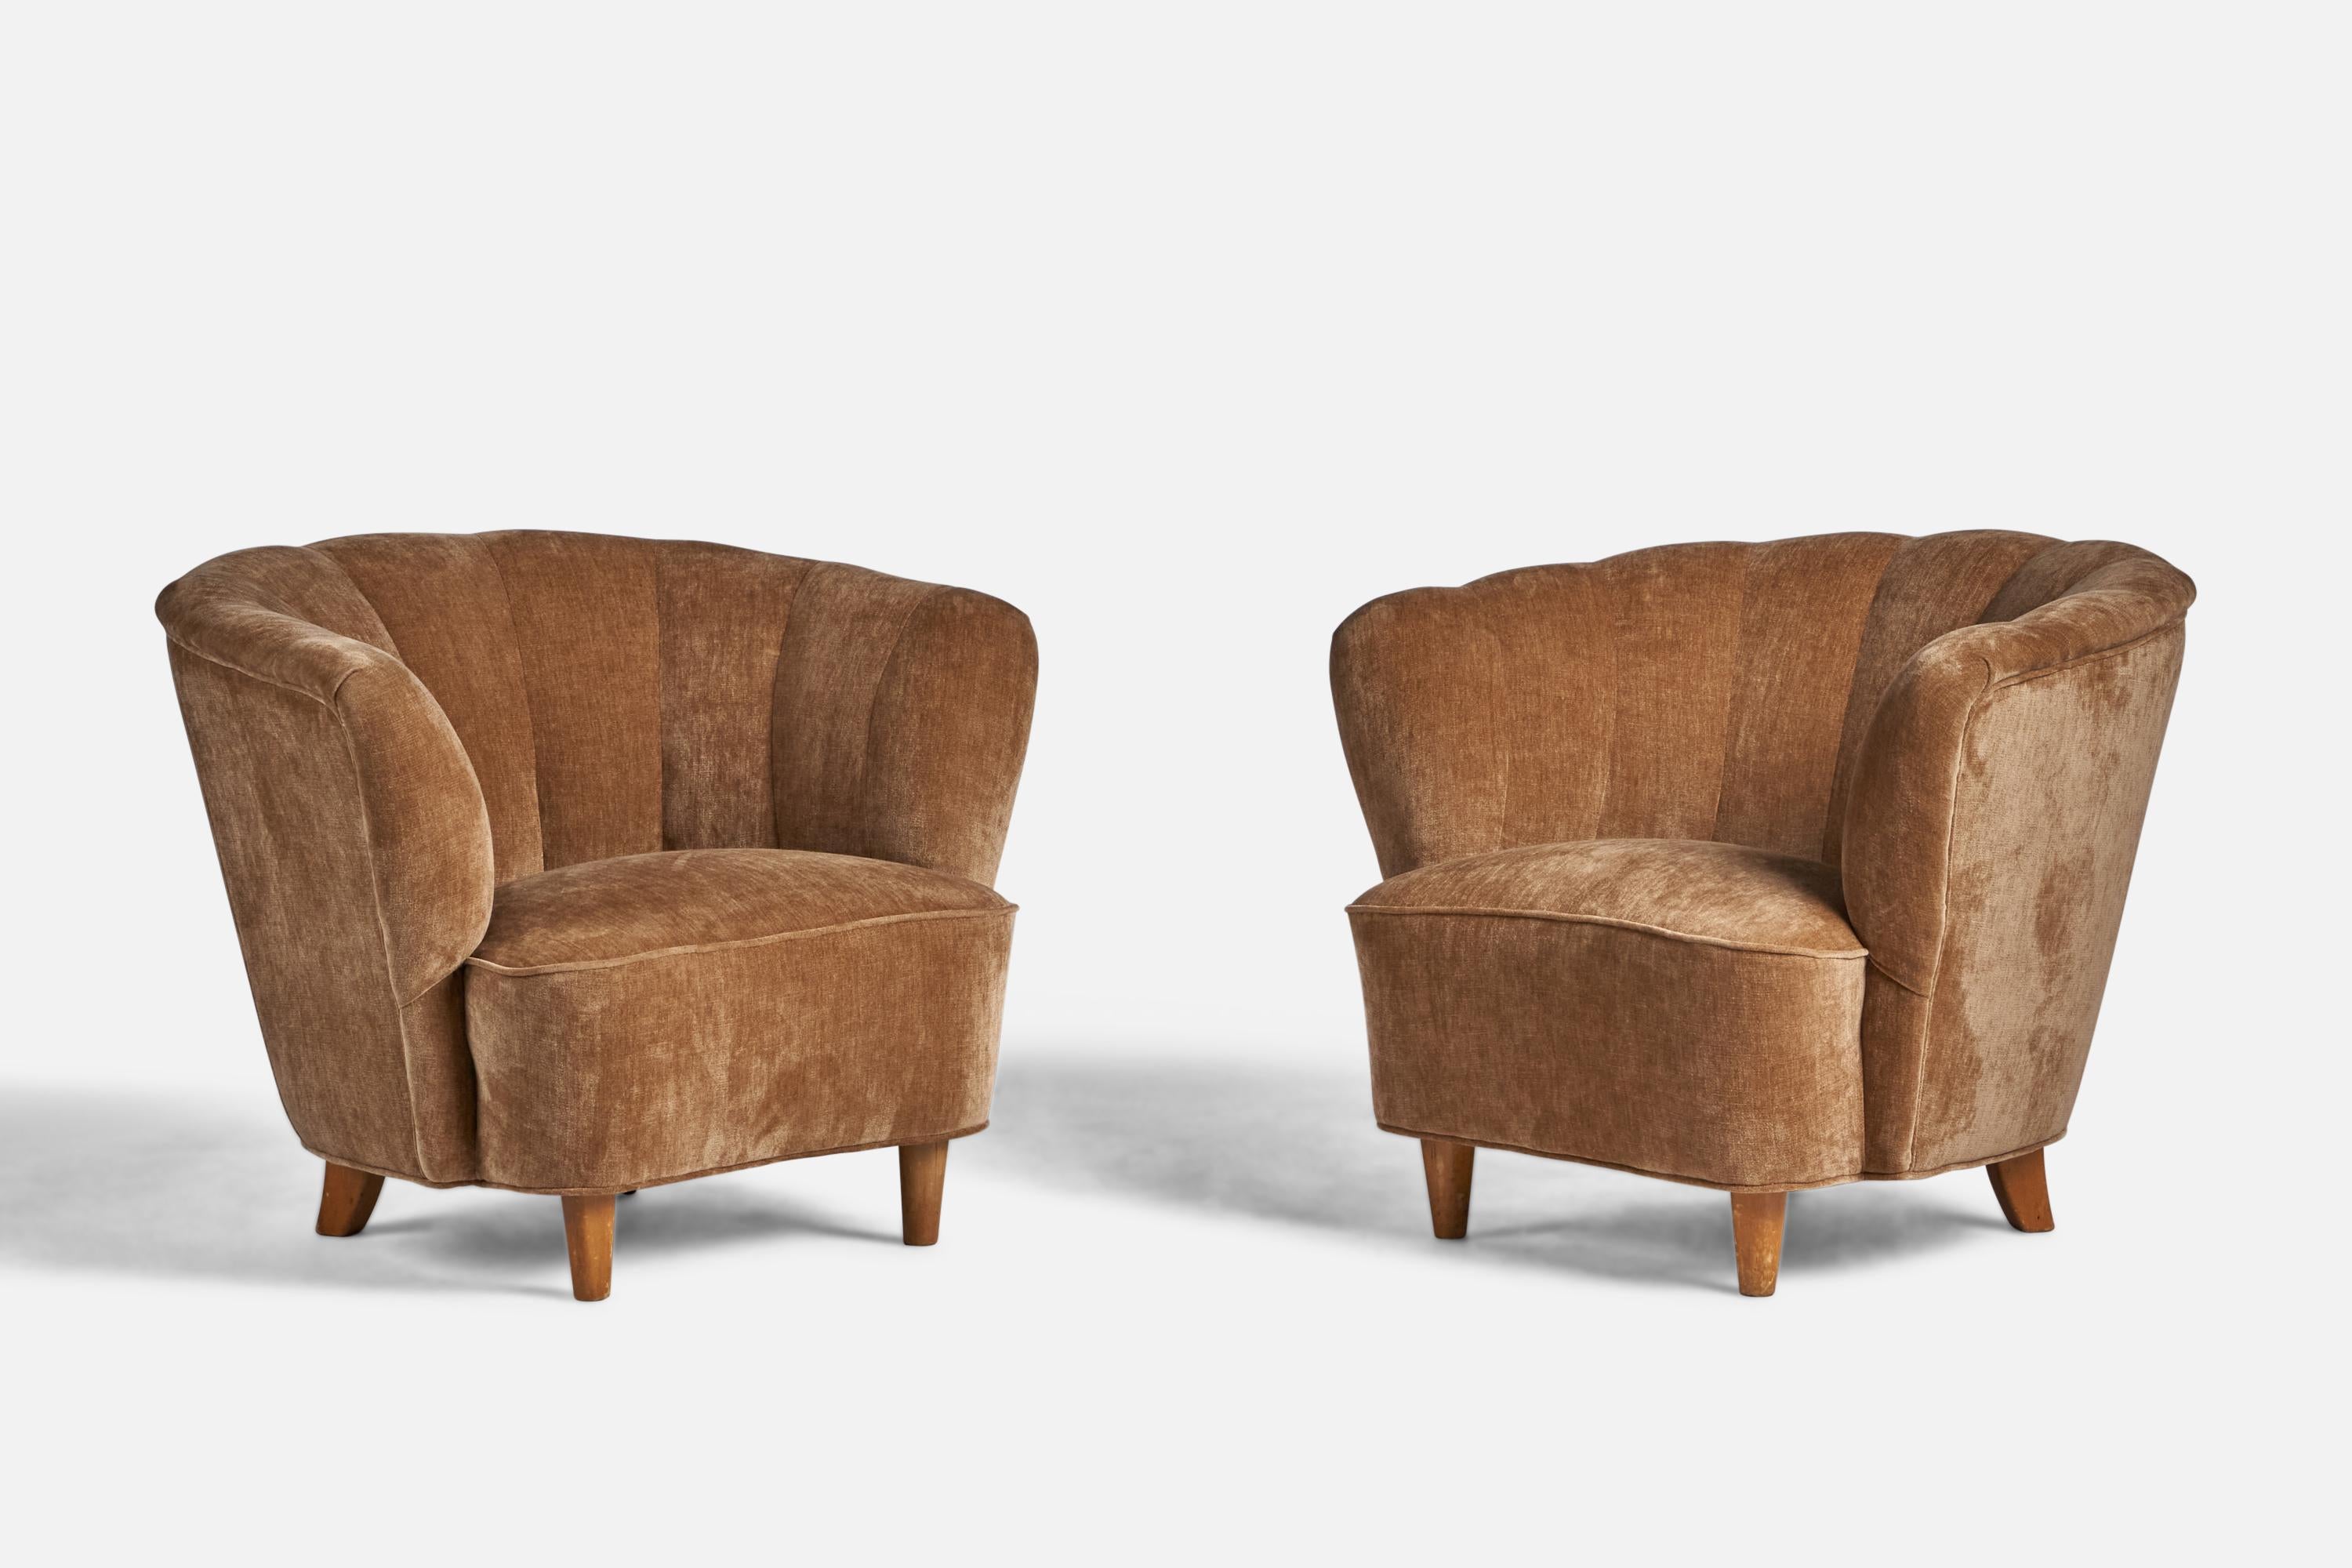 A pair of beige velvet fabric and birch lounge chairs designed and produced in Finland, 1940s.
Seat height: 14.5”